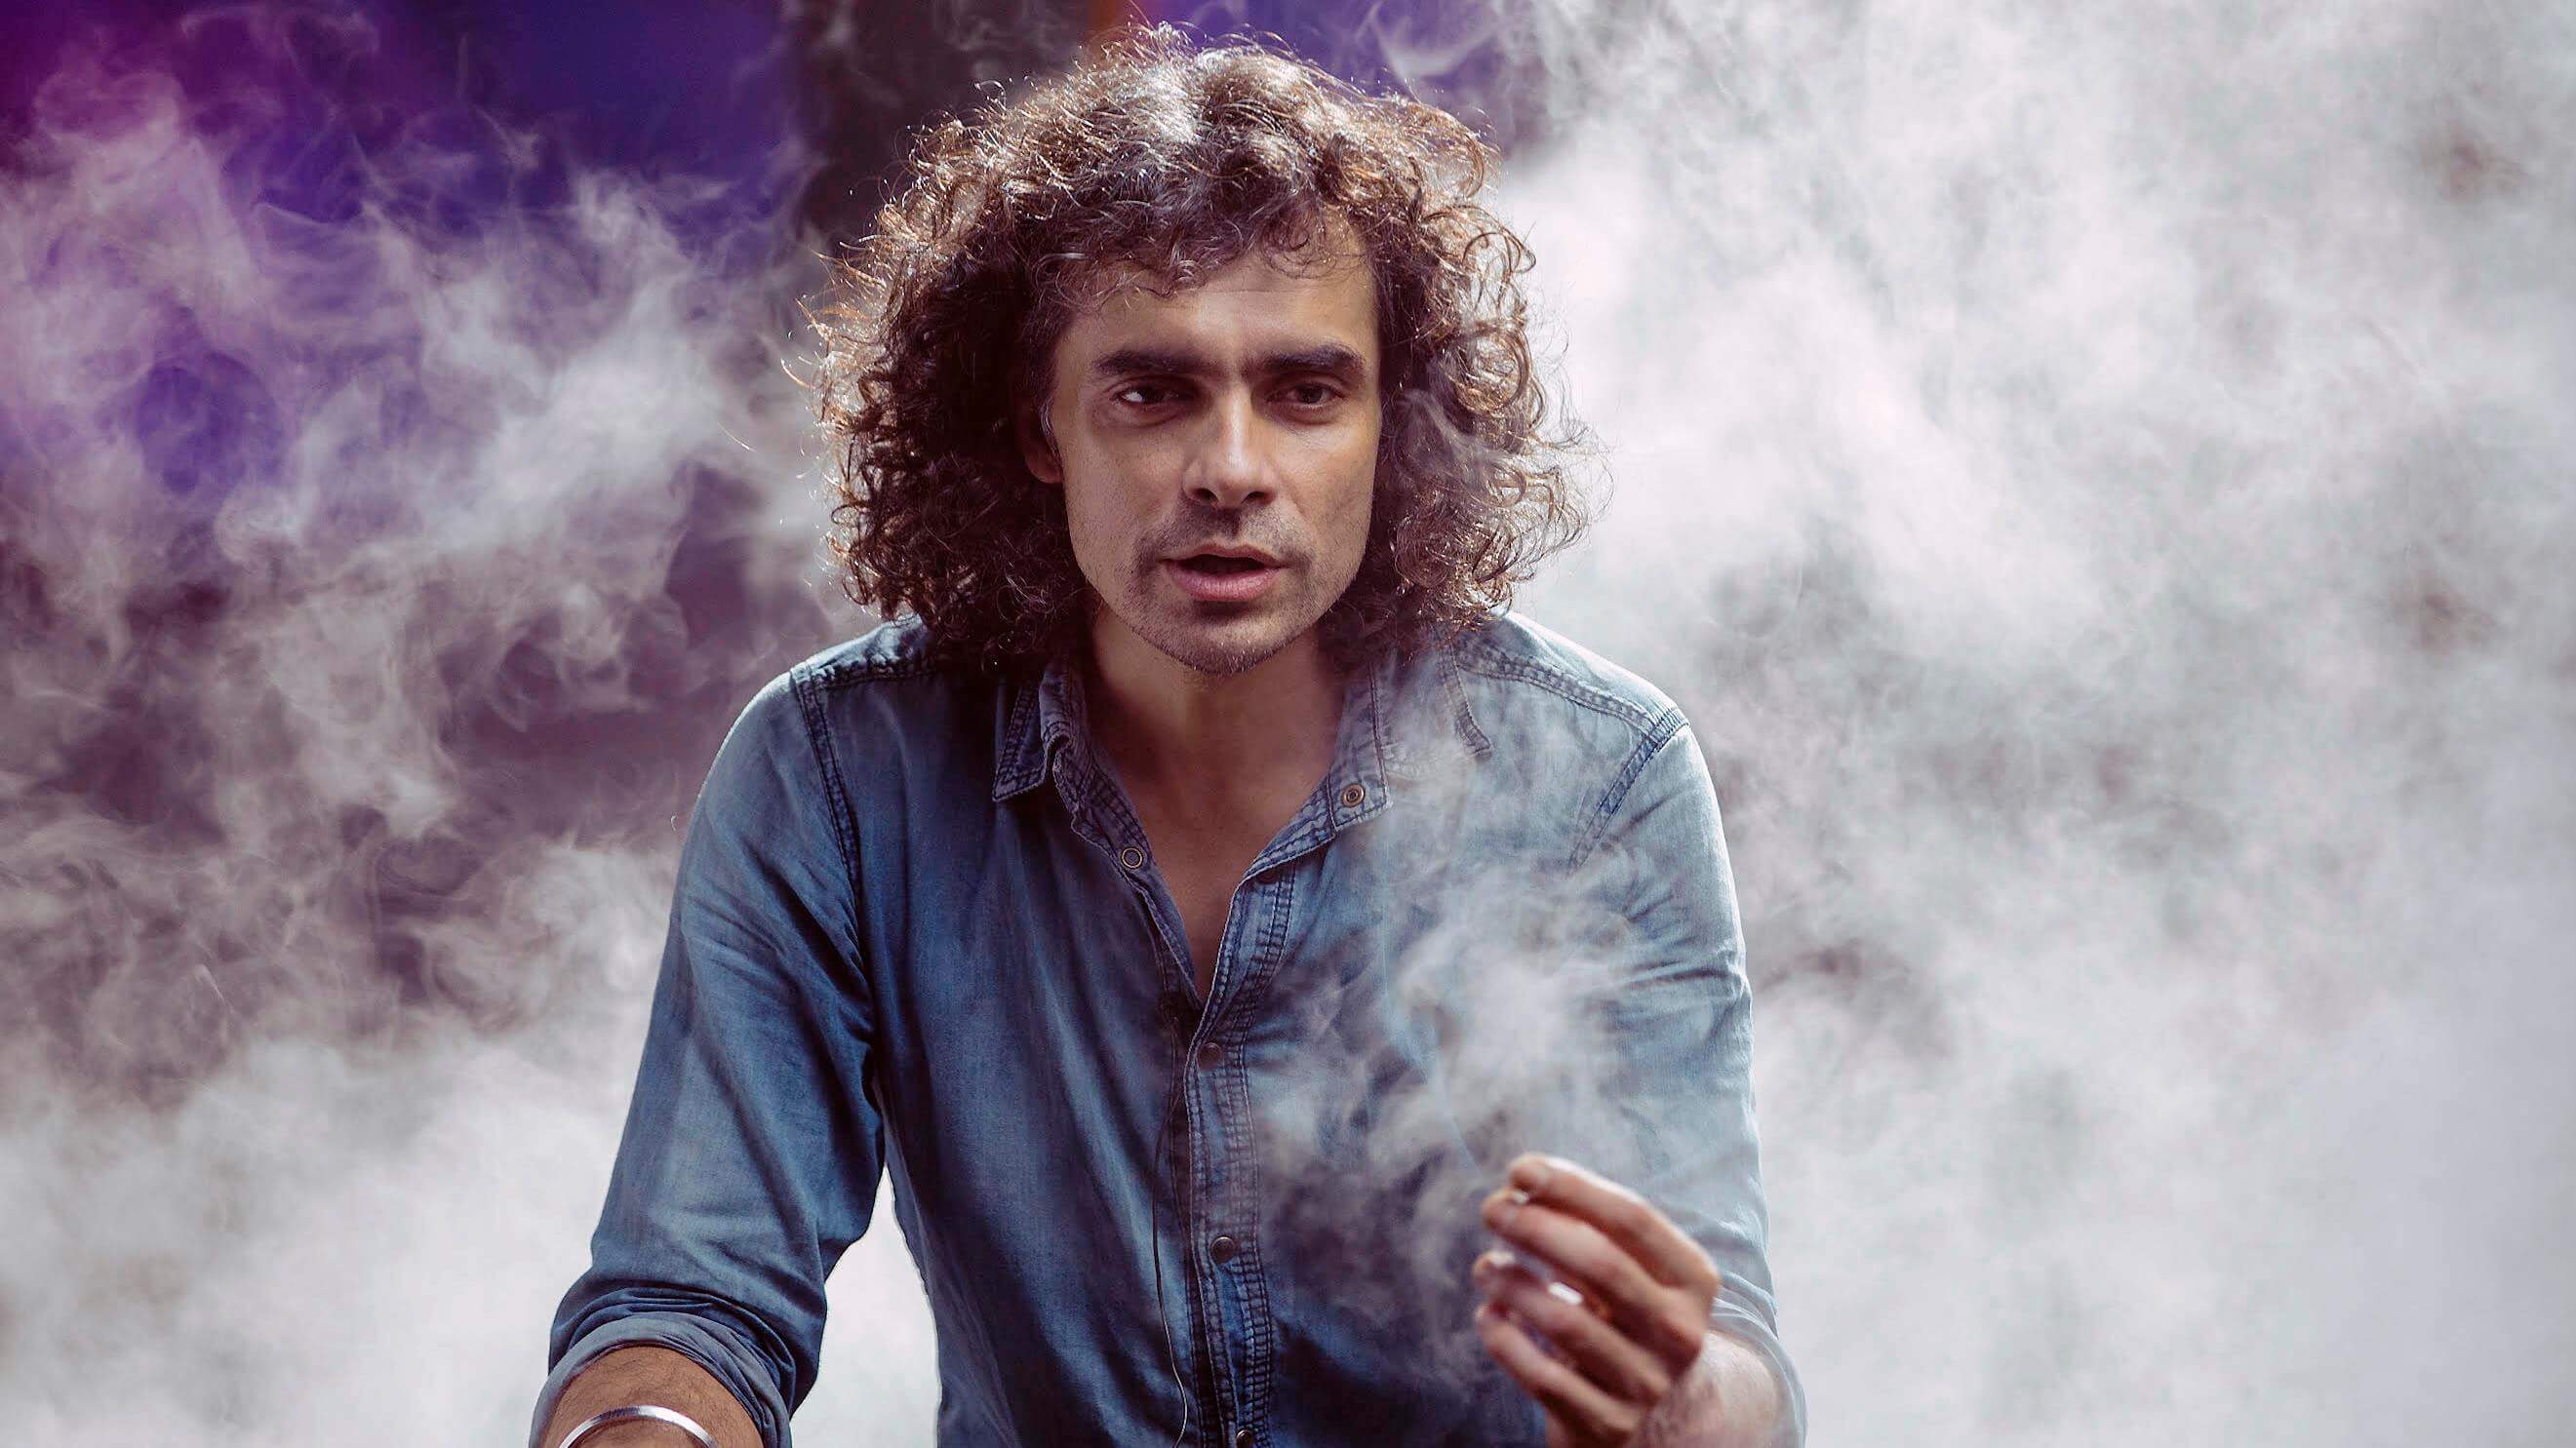 Imtiaz Ali Movies, Ranked from Least Good to Best - FilmSpell